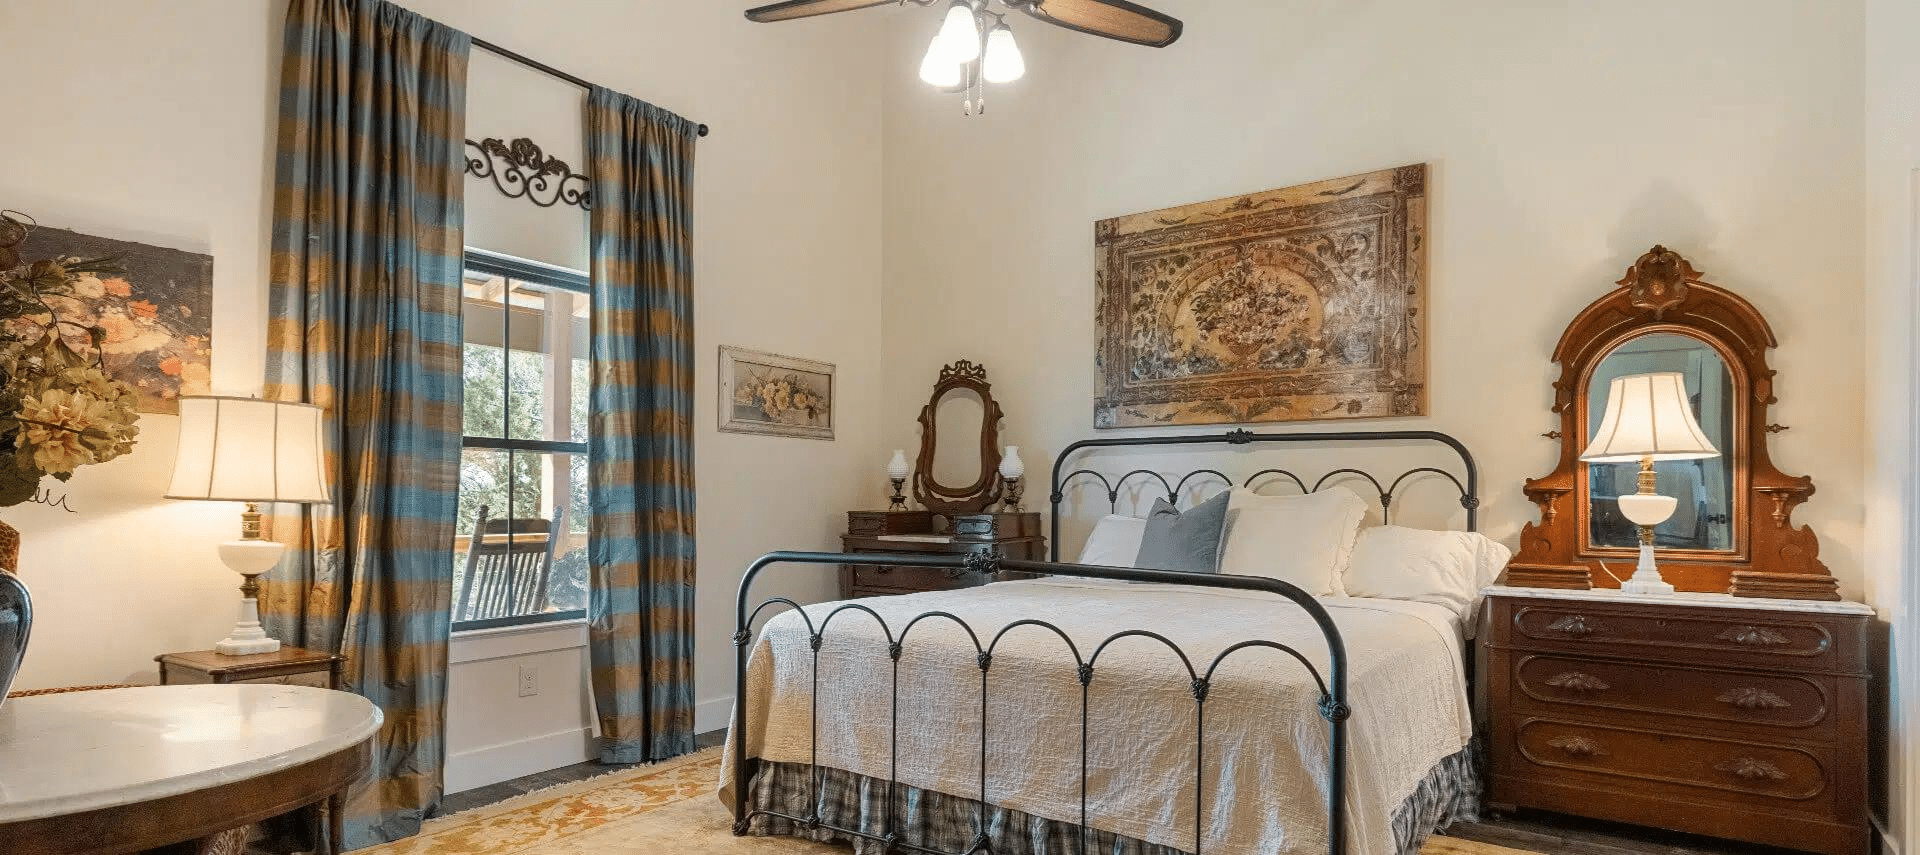 Image of Gorgeous accommodations (king bed, ceiling to floor drapers, and antique style furniture) in The Sunset Room at Inn at Sunset Mill Ranch in Texas Hill Country